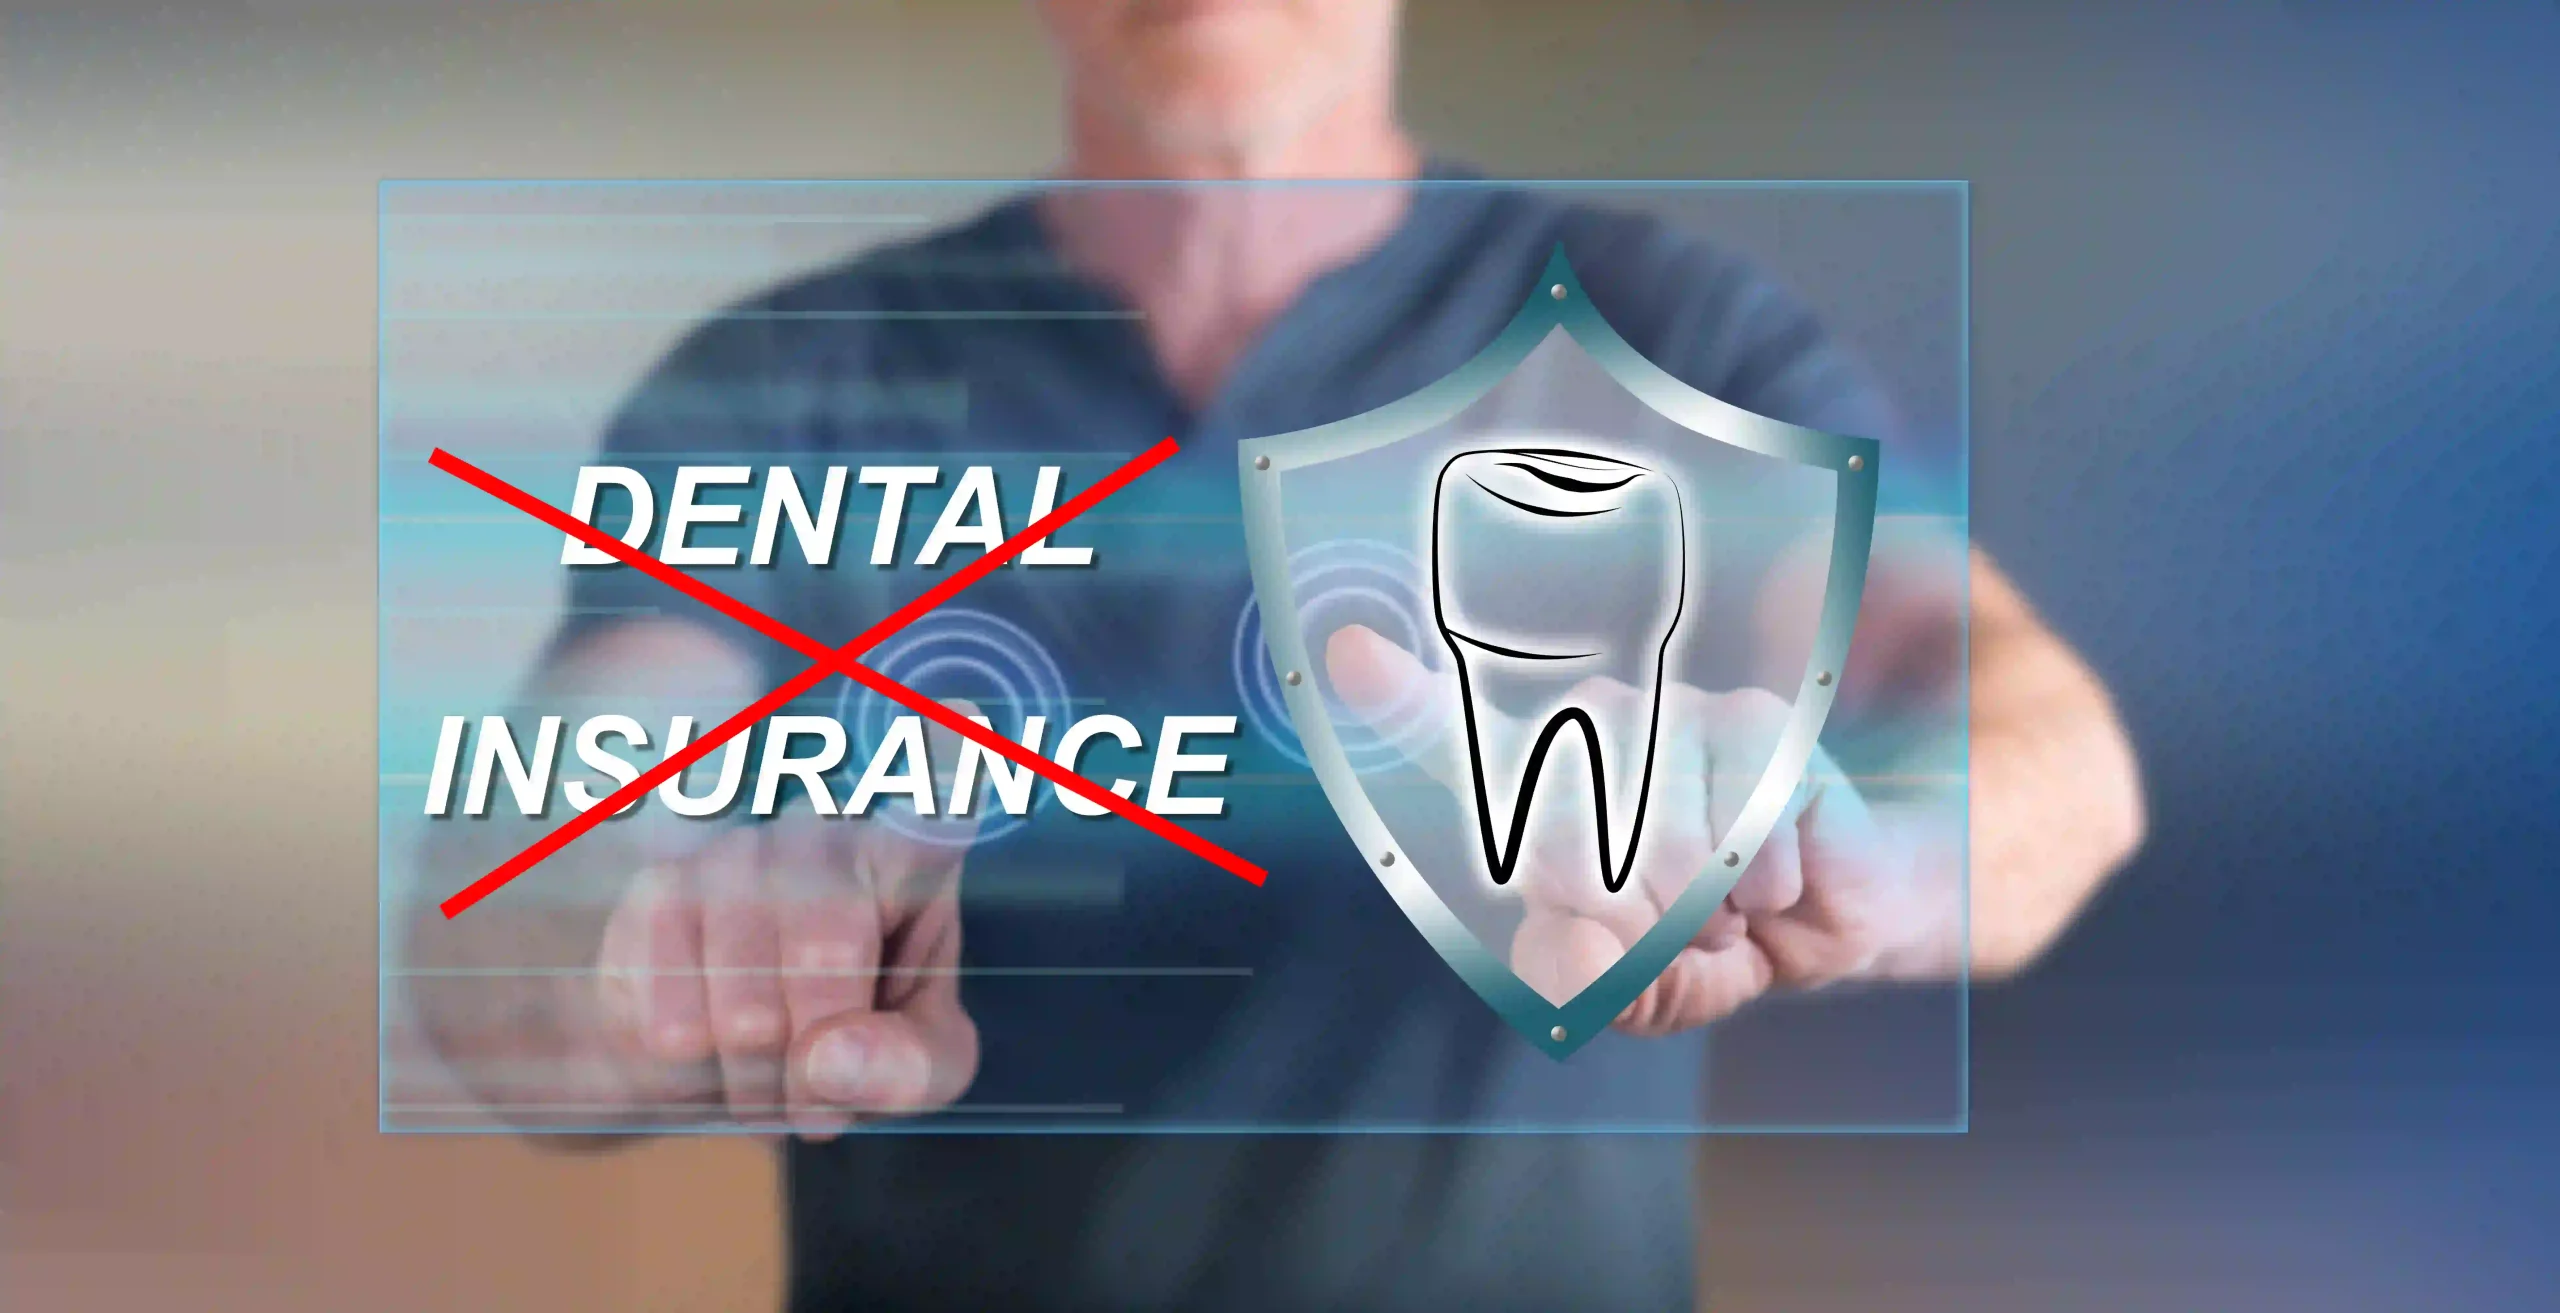 A dental insurance sign with a red cross across it